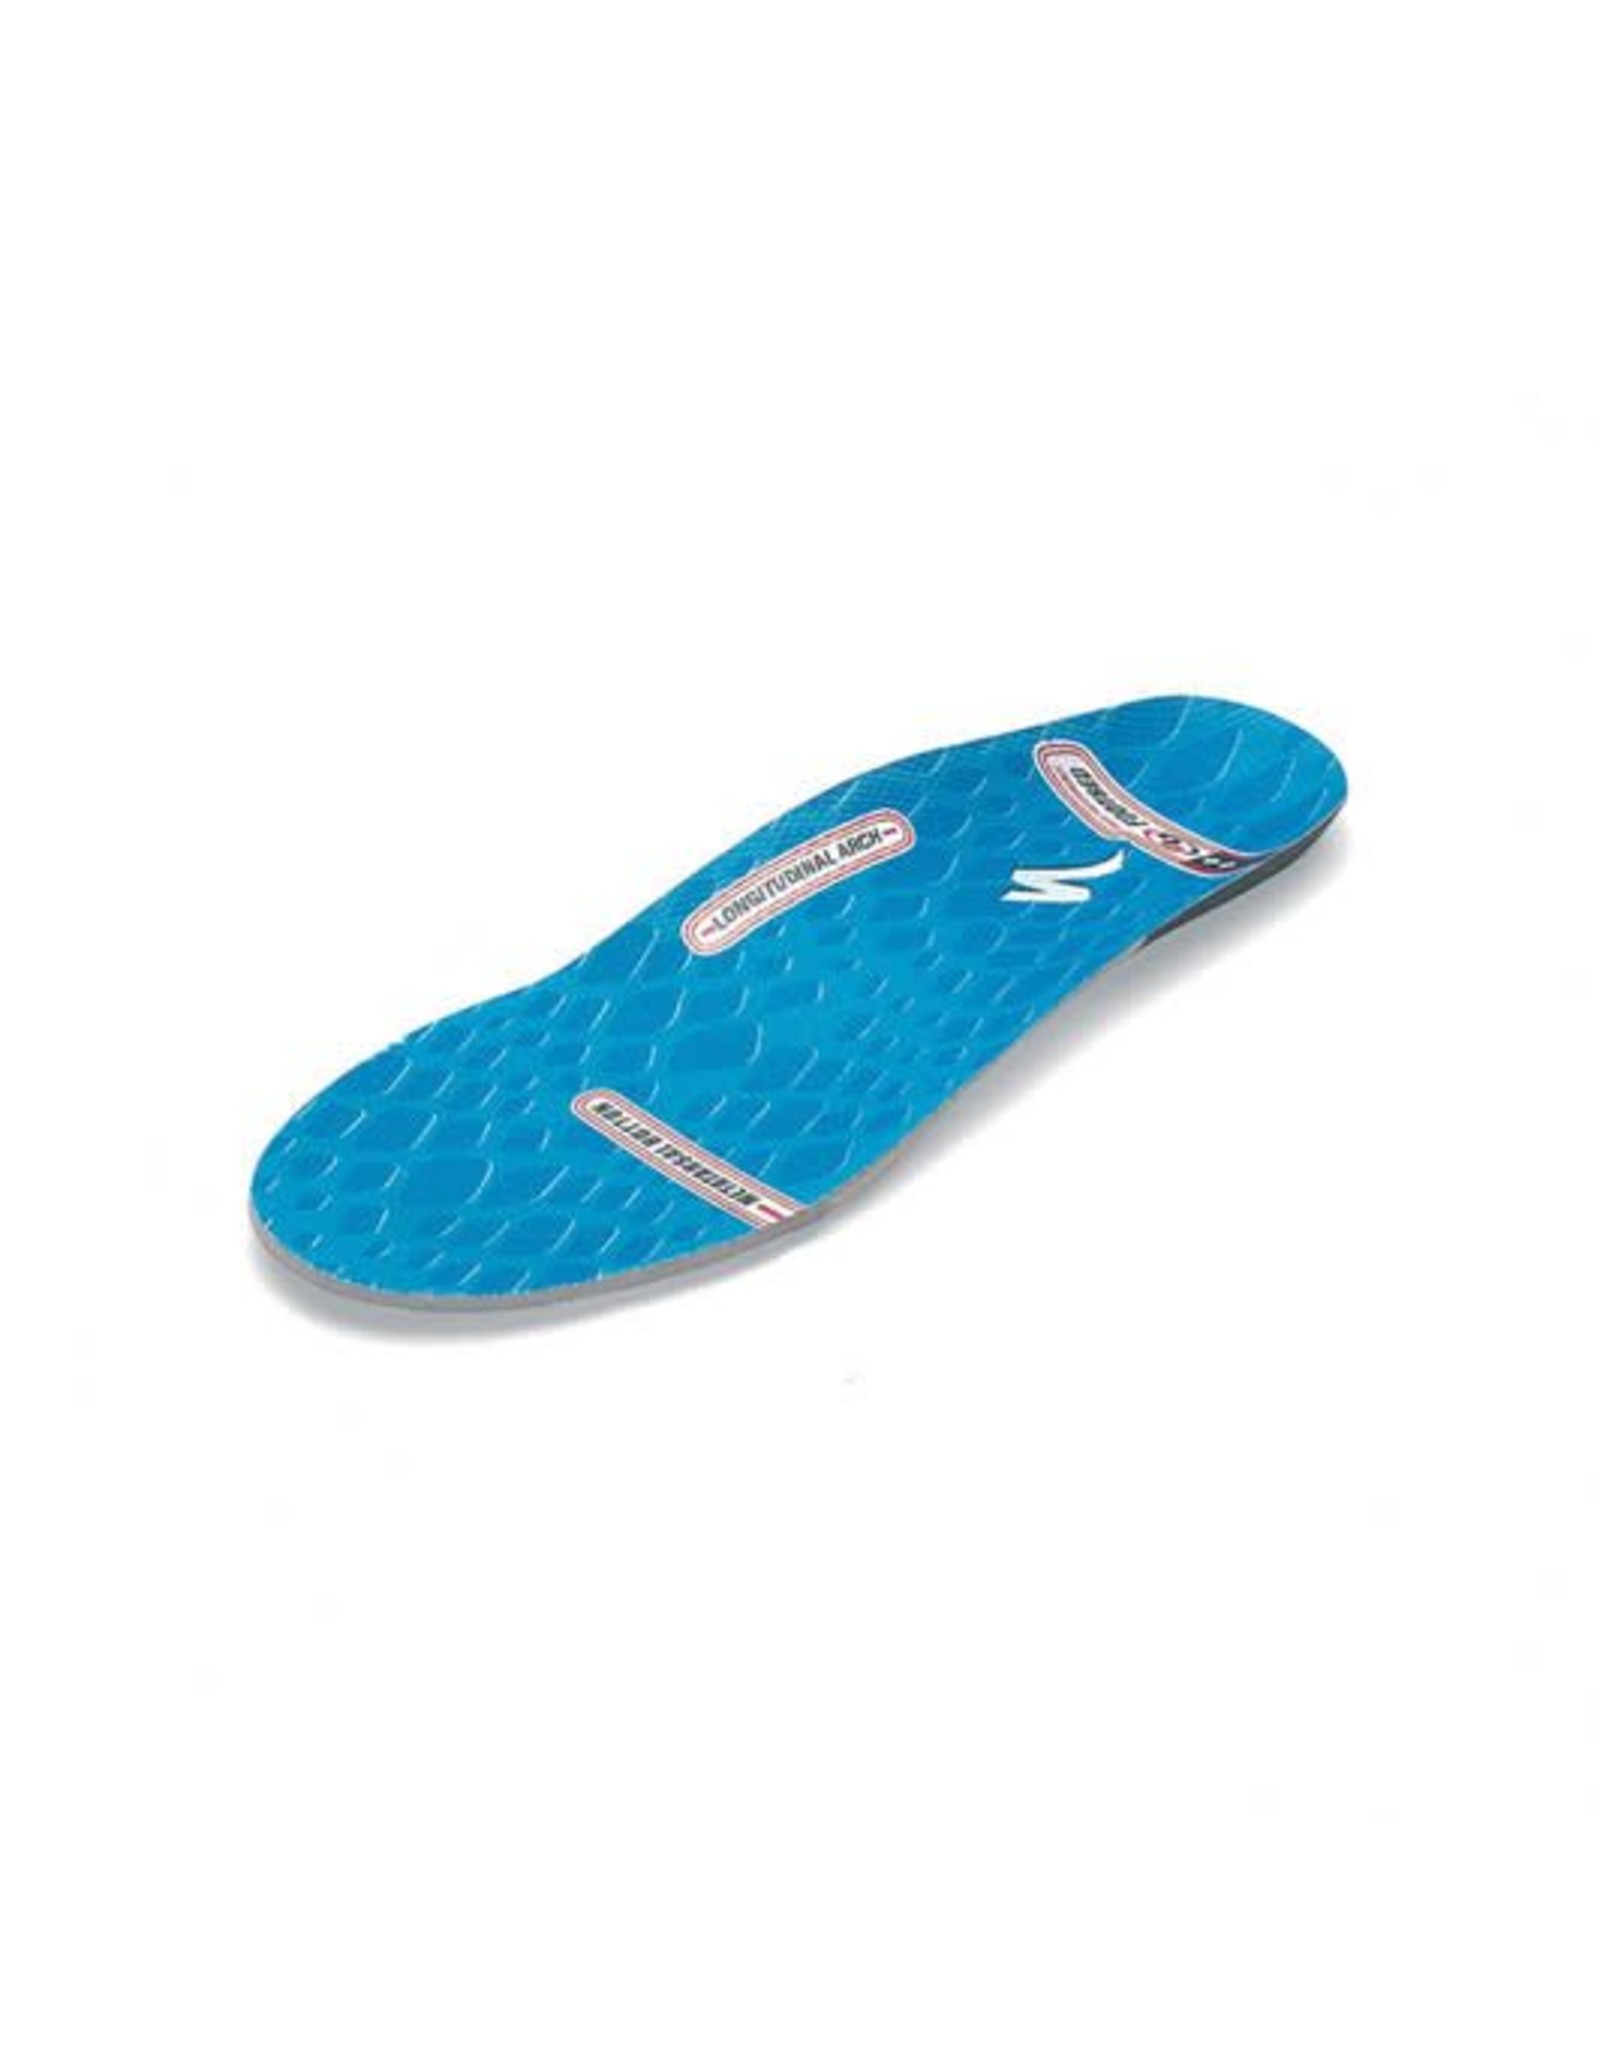 SPECIALIZED Specialized BG High Performance Footbed ++ Blue - 49-50